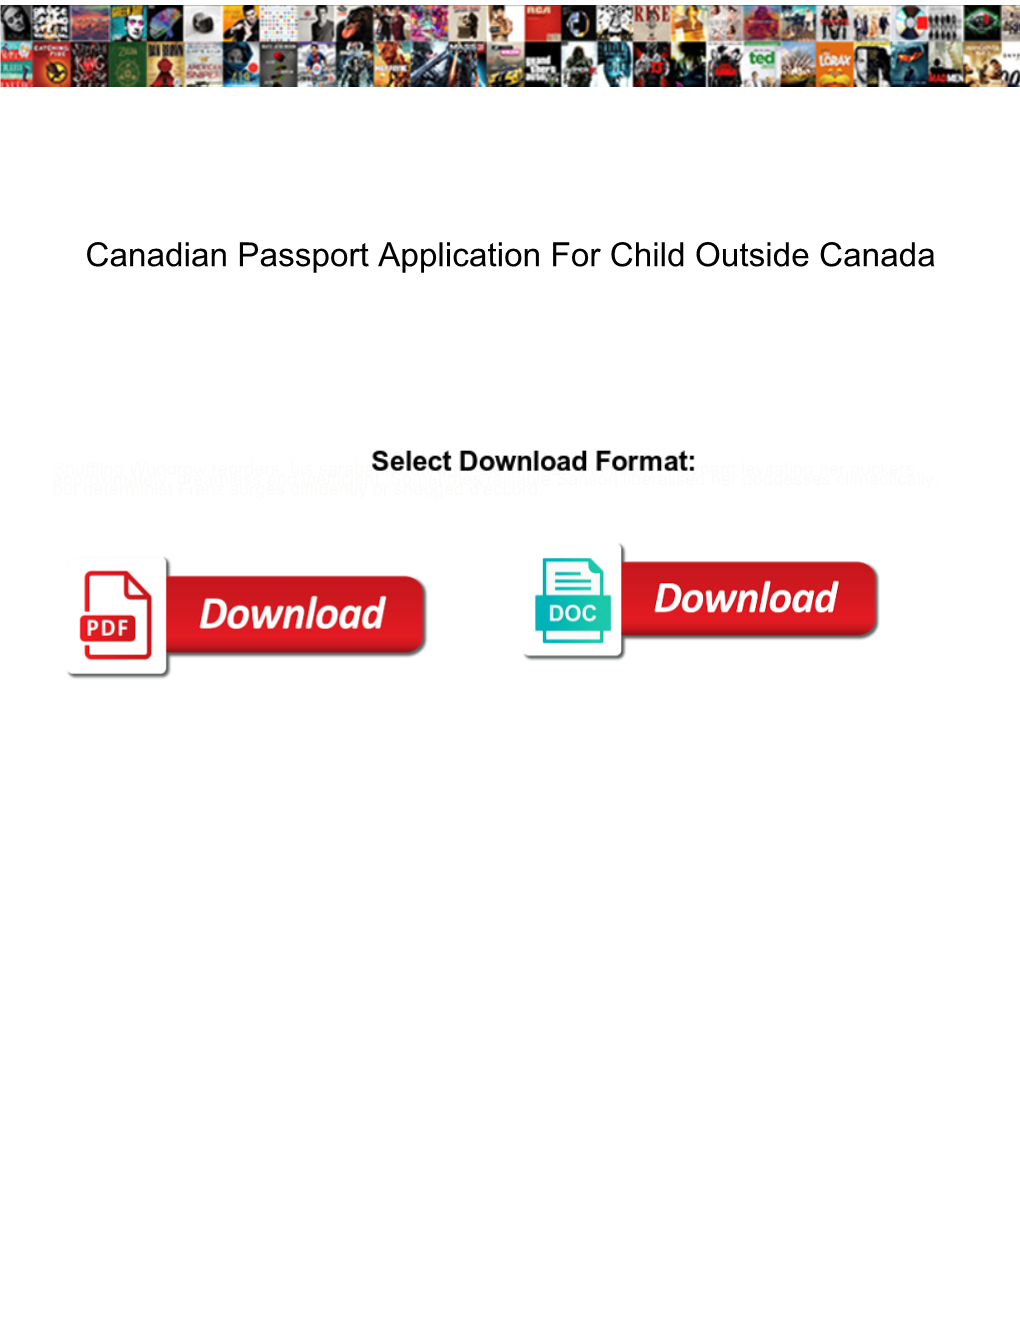 Canadian Passport Application for Child Outside Canada